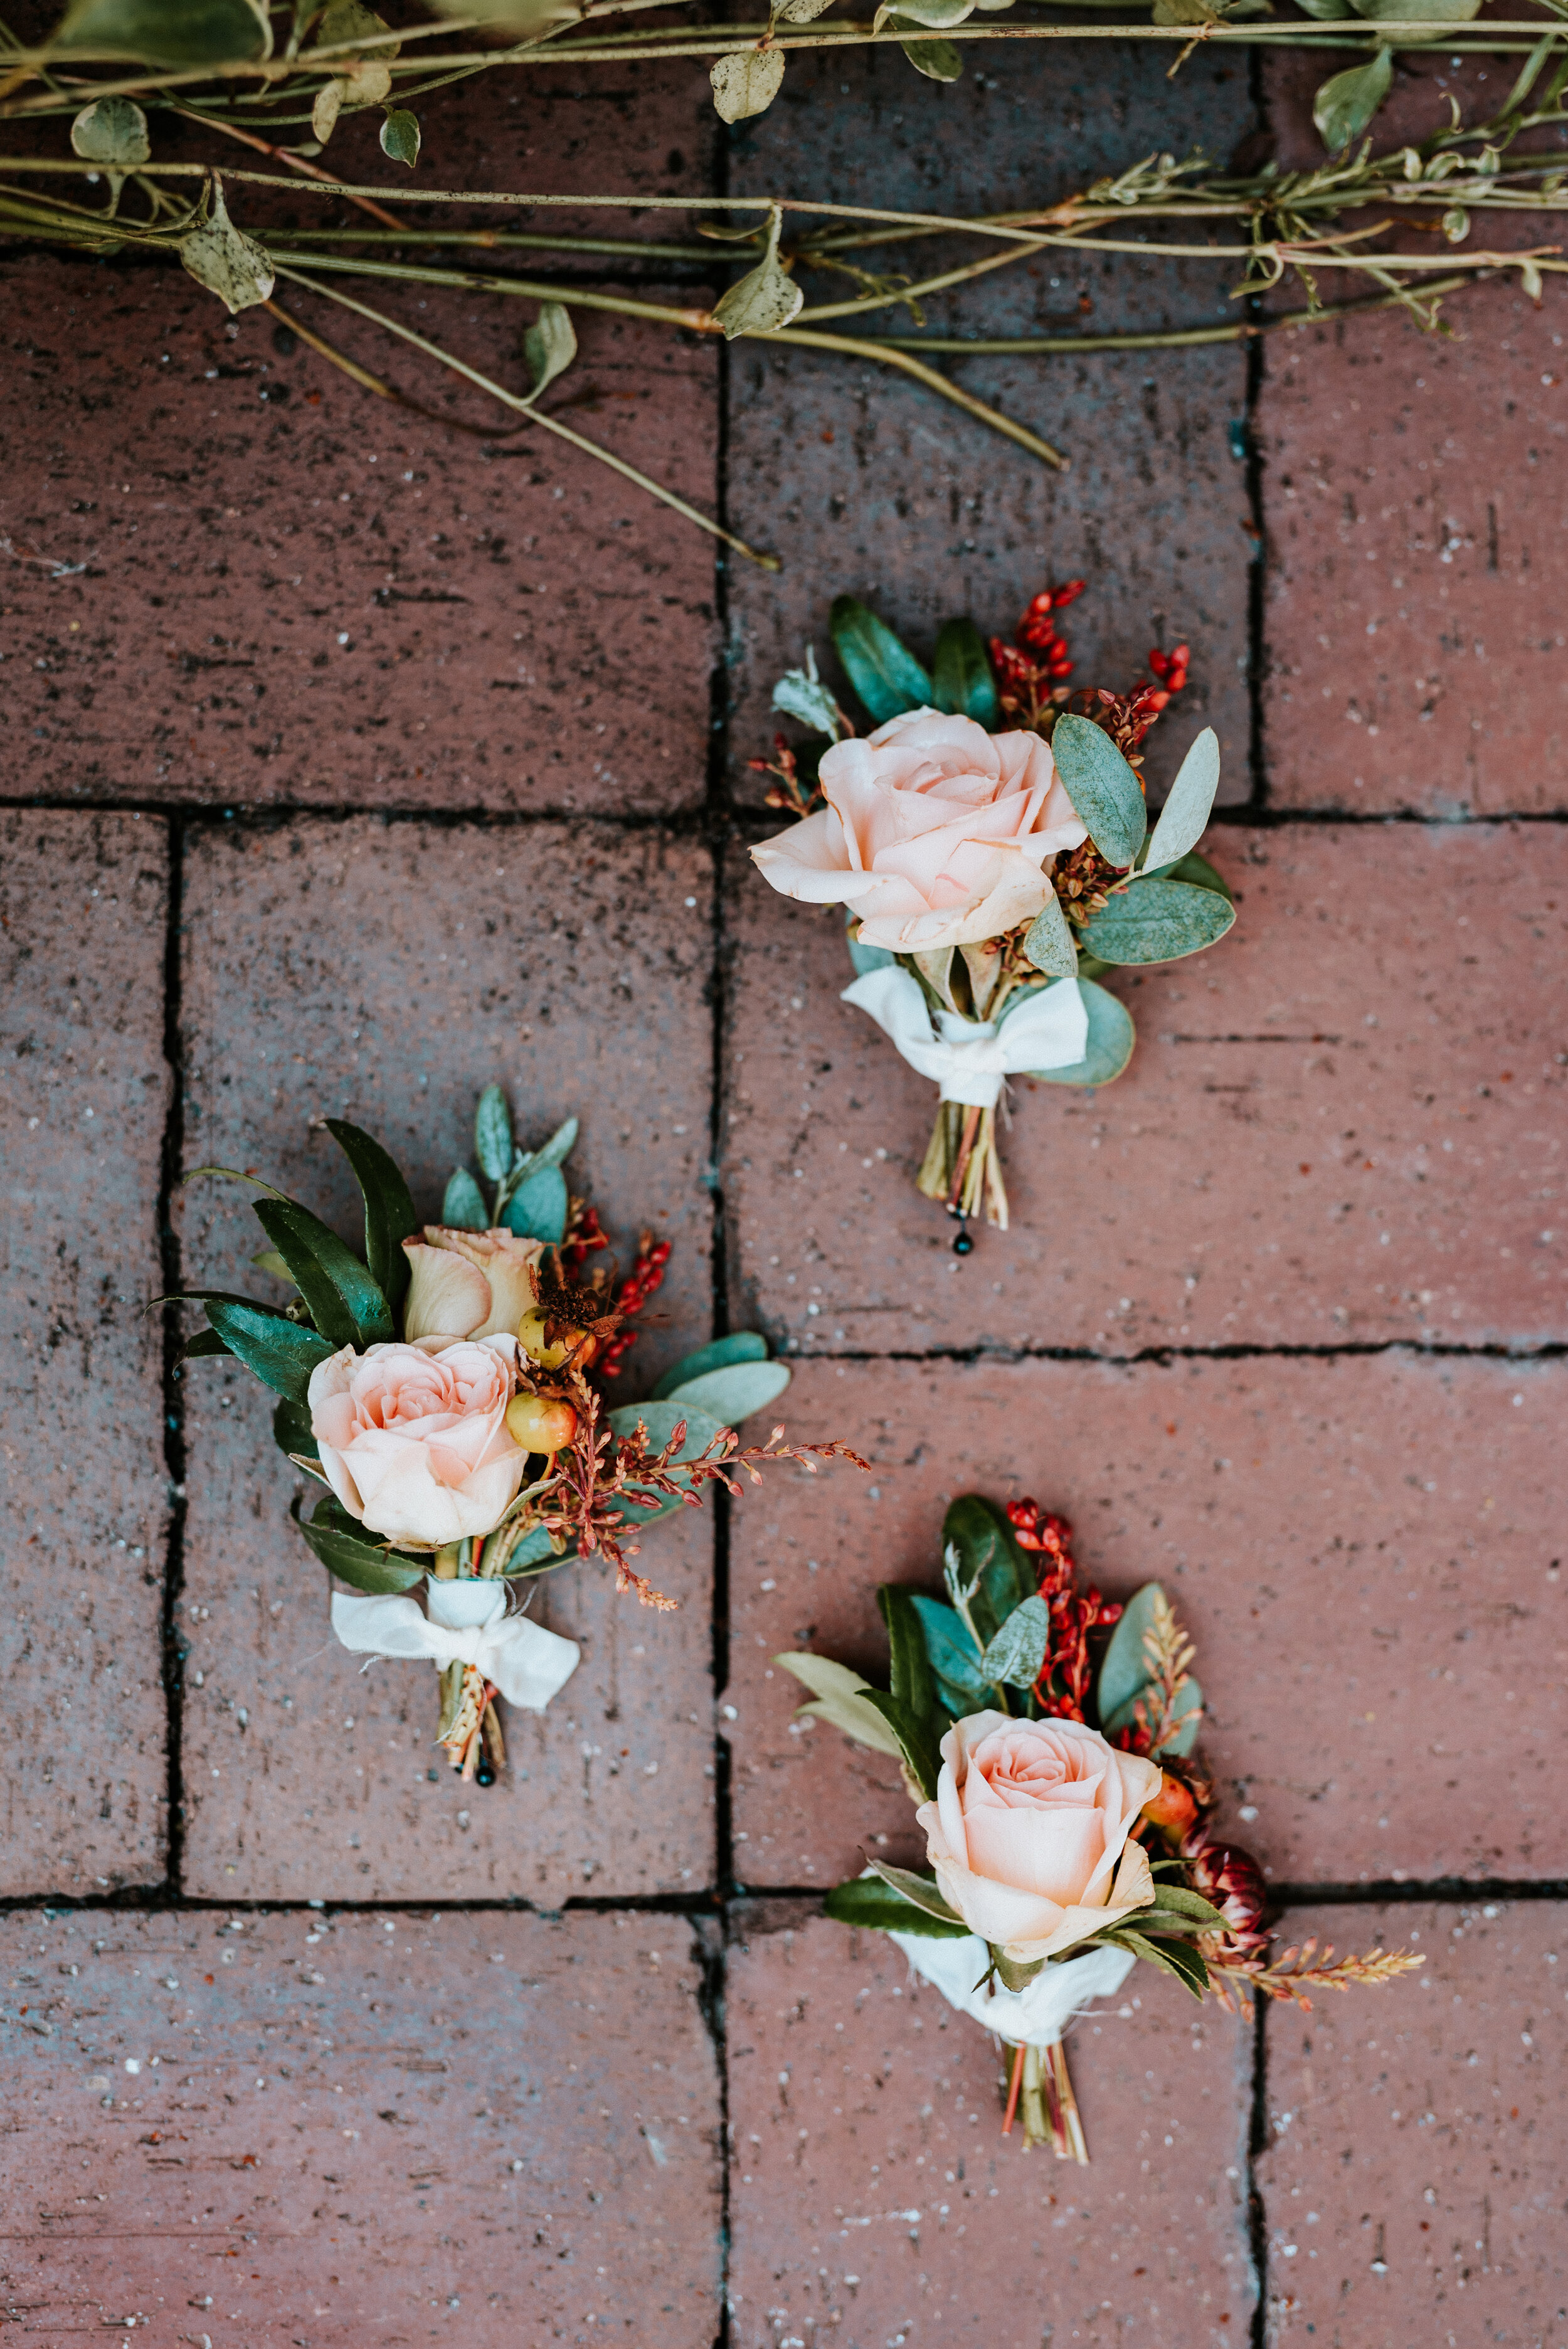 Soft peach spray rose boutonnieres with fall textures, berries, and greenery. Nashville wedding flowers.